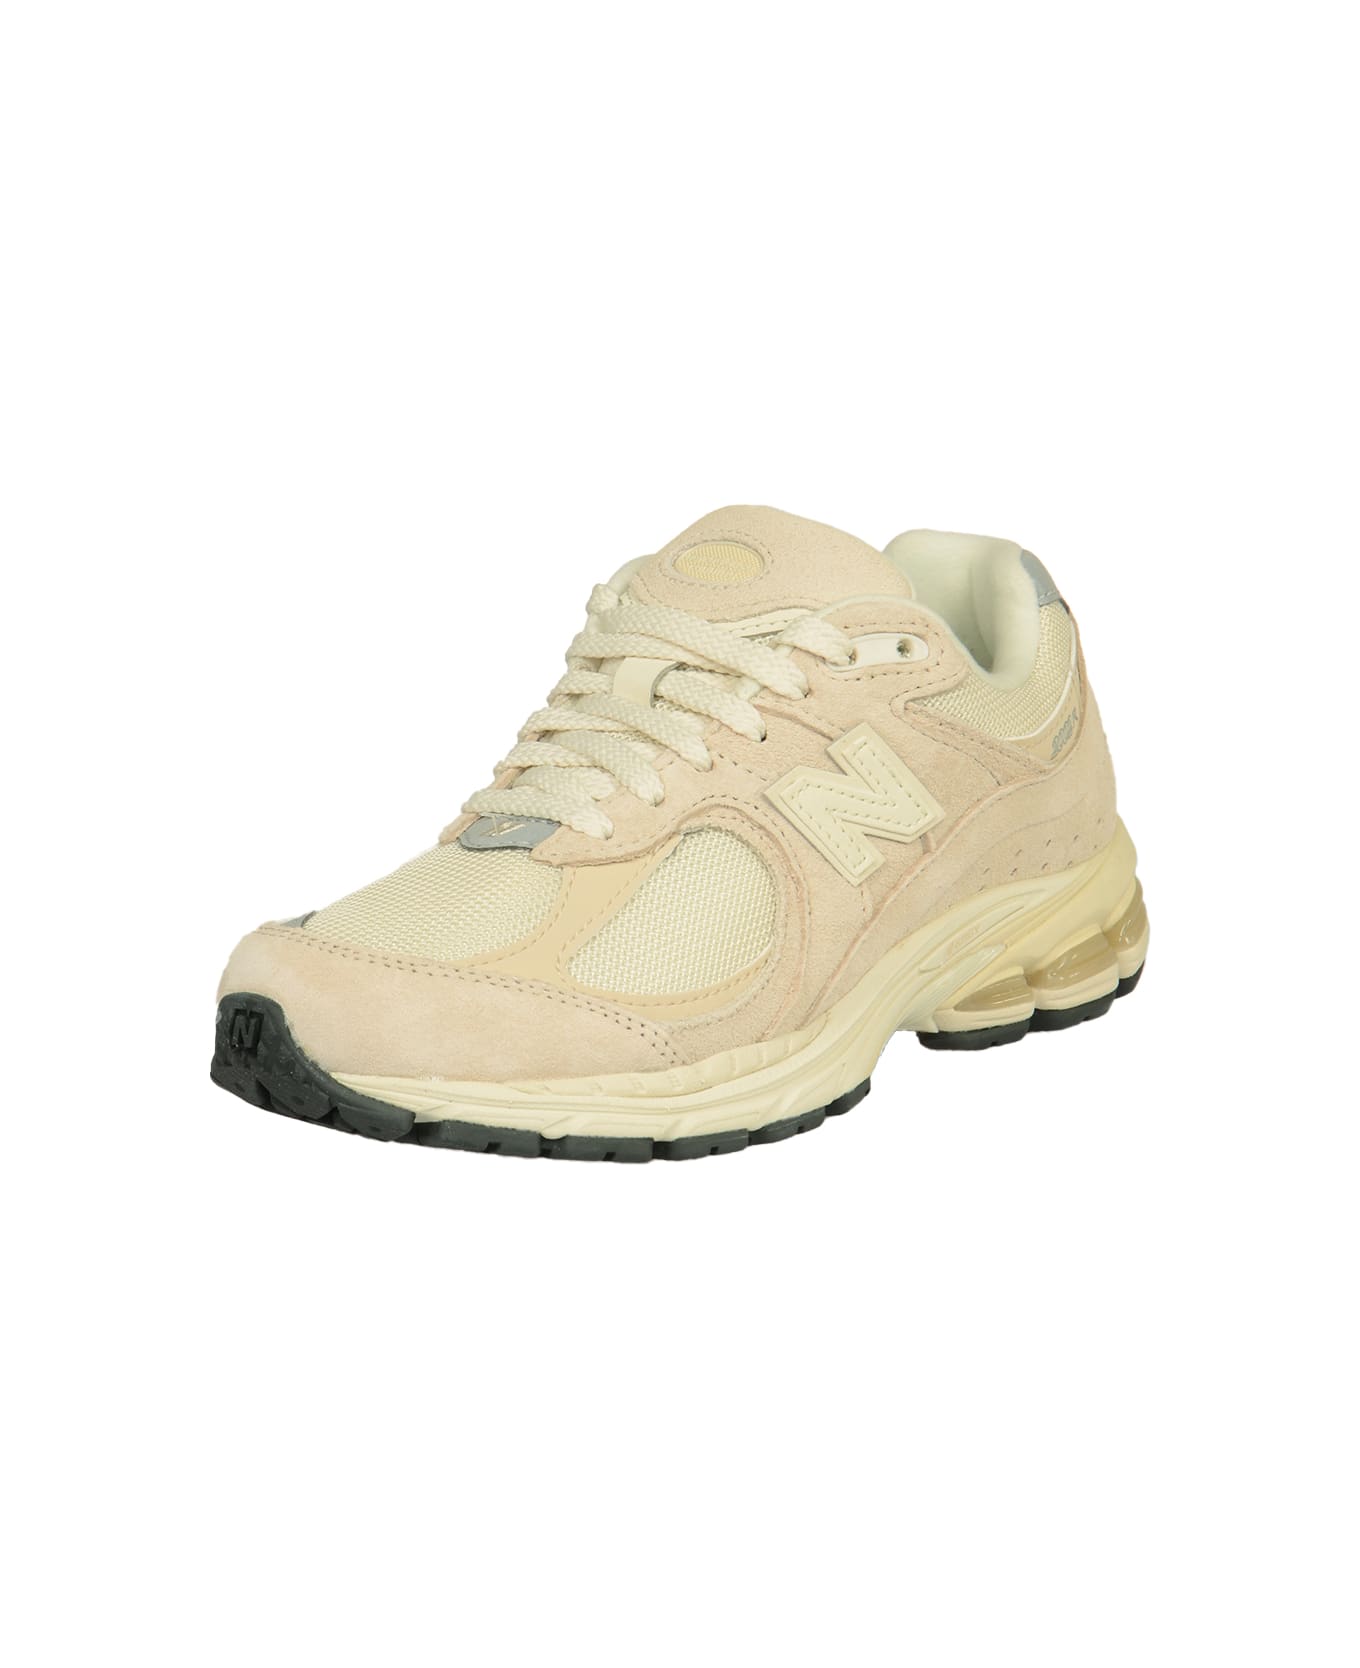 New Balance Mesh Panel Logo Patched Sneakers スニーカー